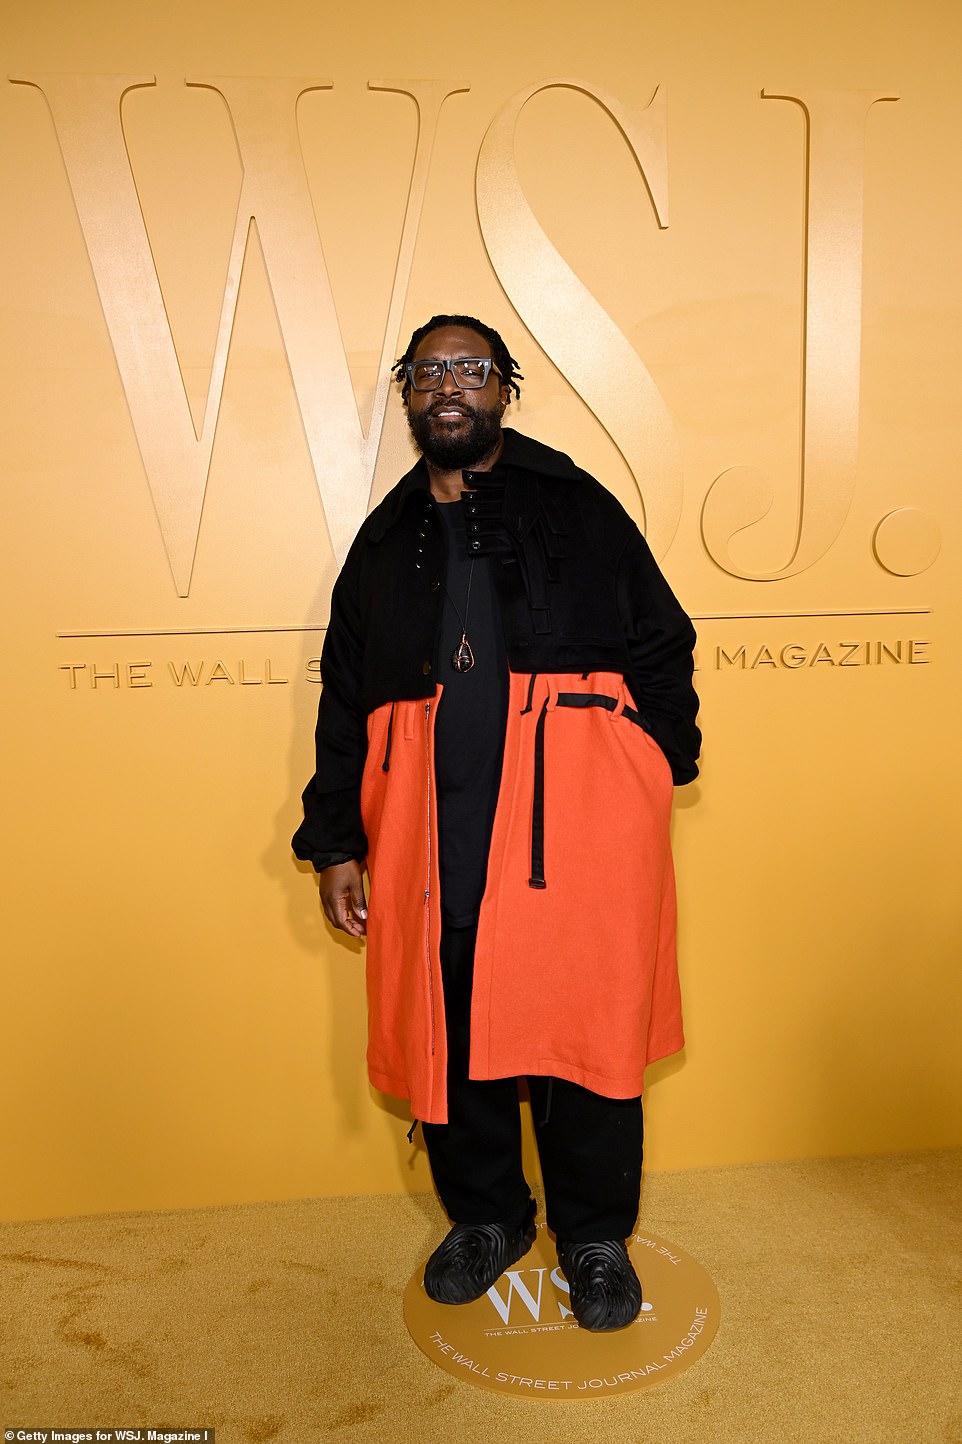 Effortlessly cool: Questlove, 52, showed off his effortlessly cool style in an oversized black and red jacket and black pants